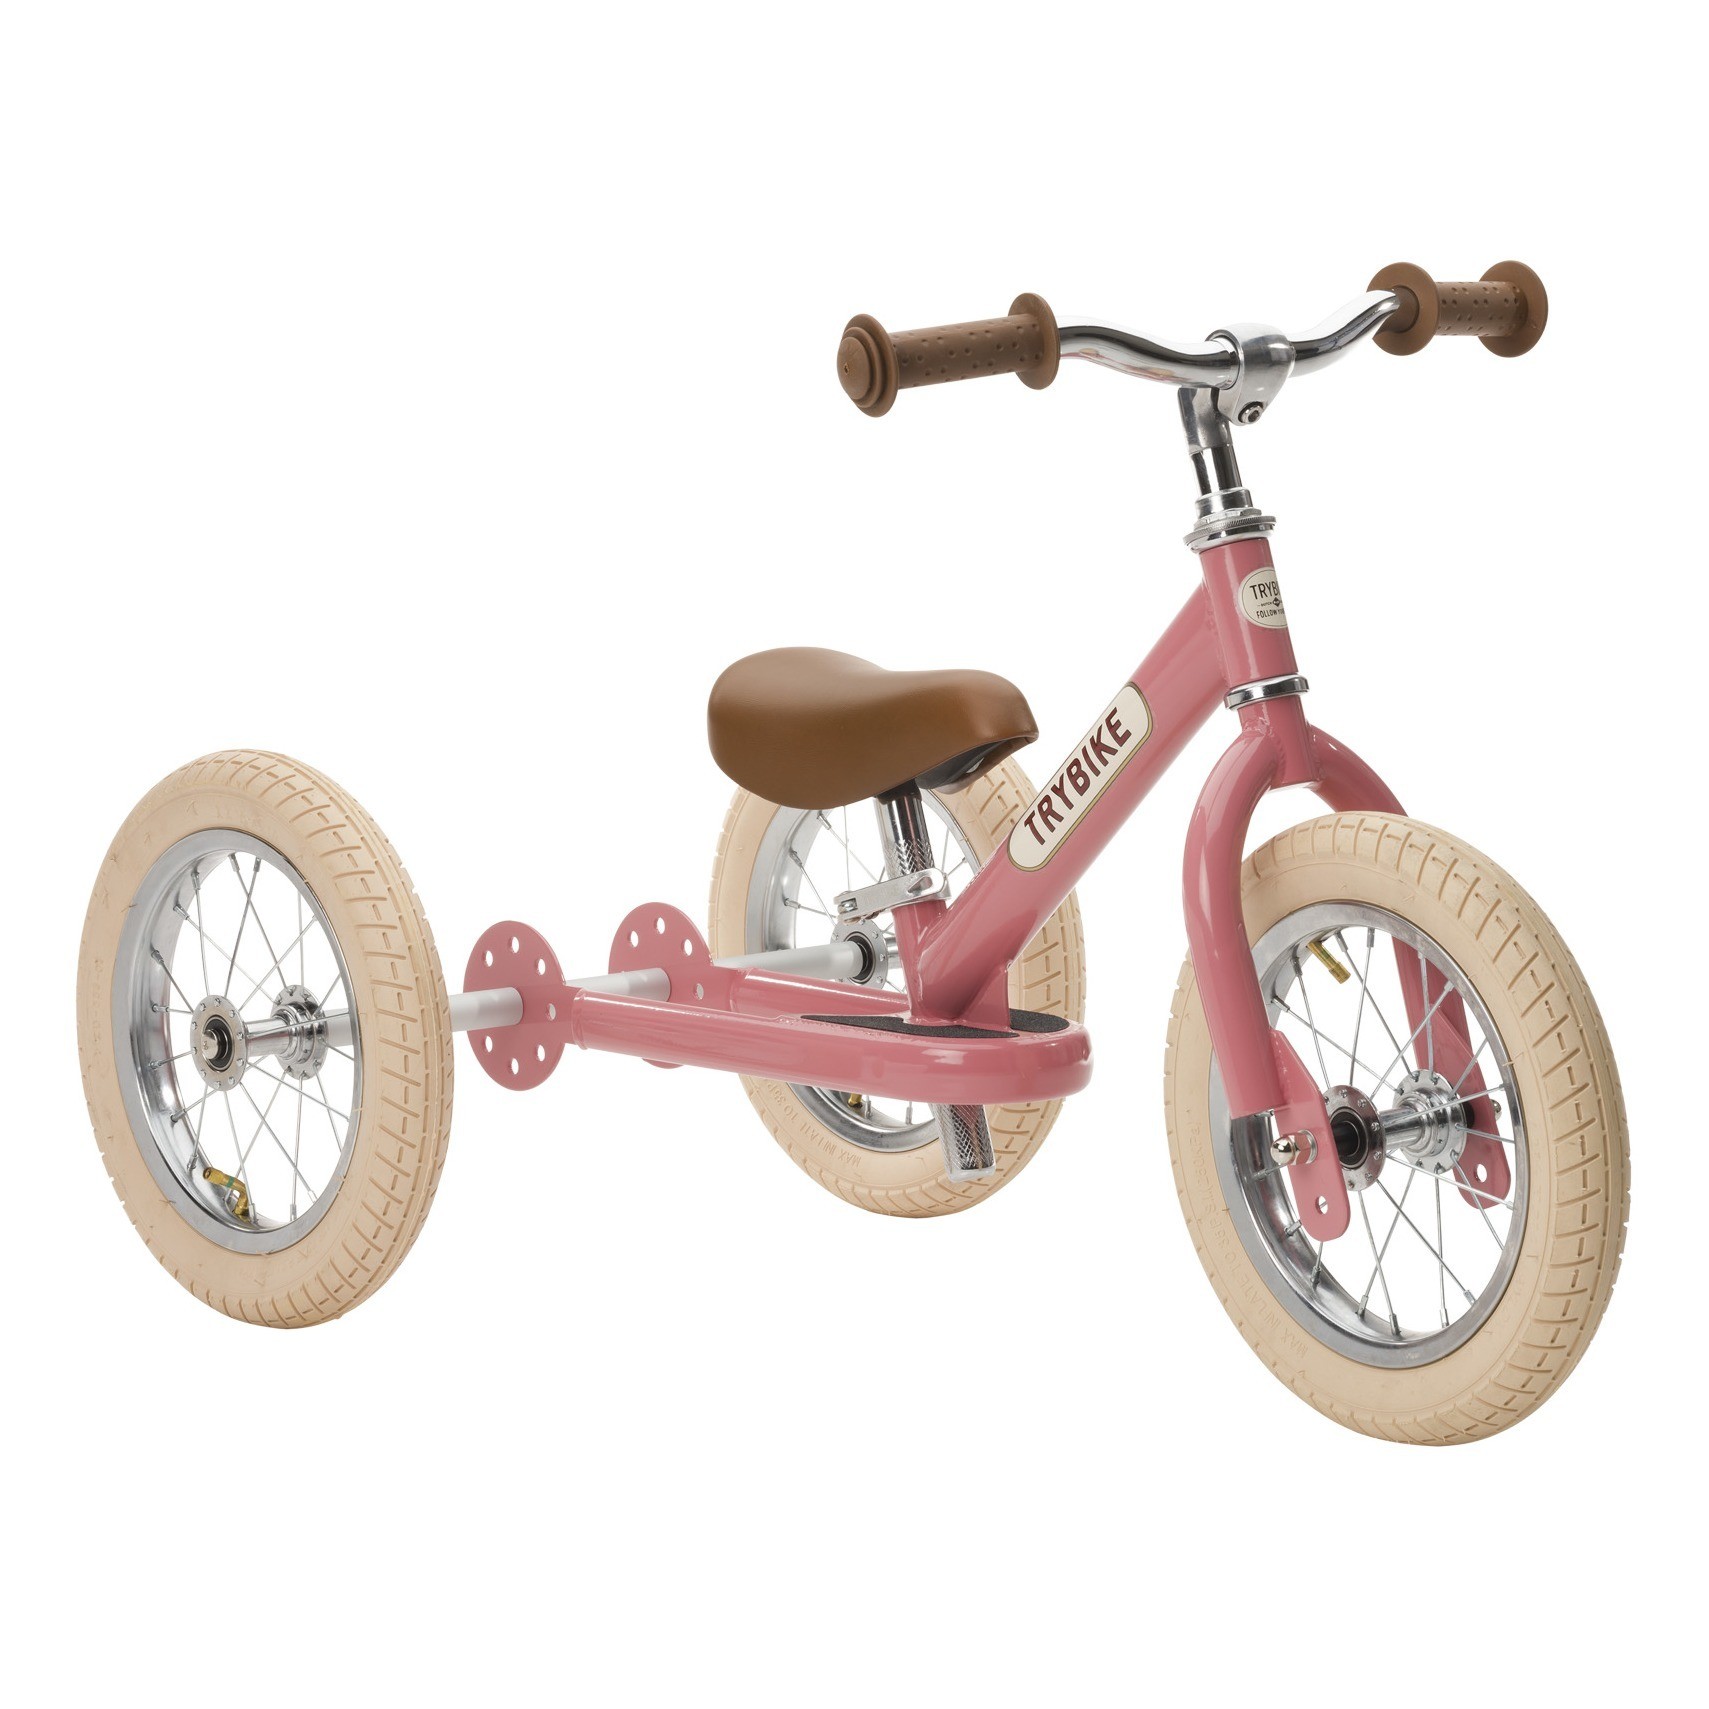 draisienne-tricycle r1